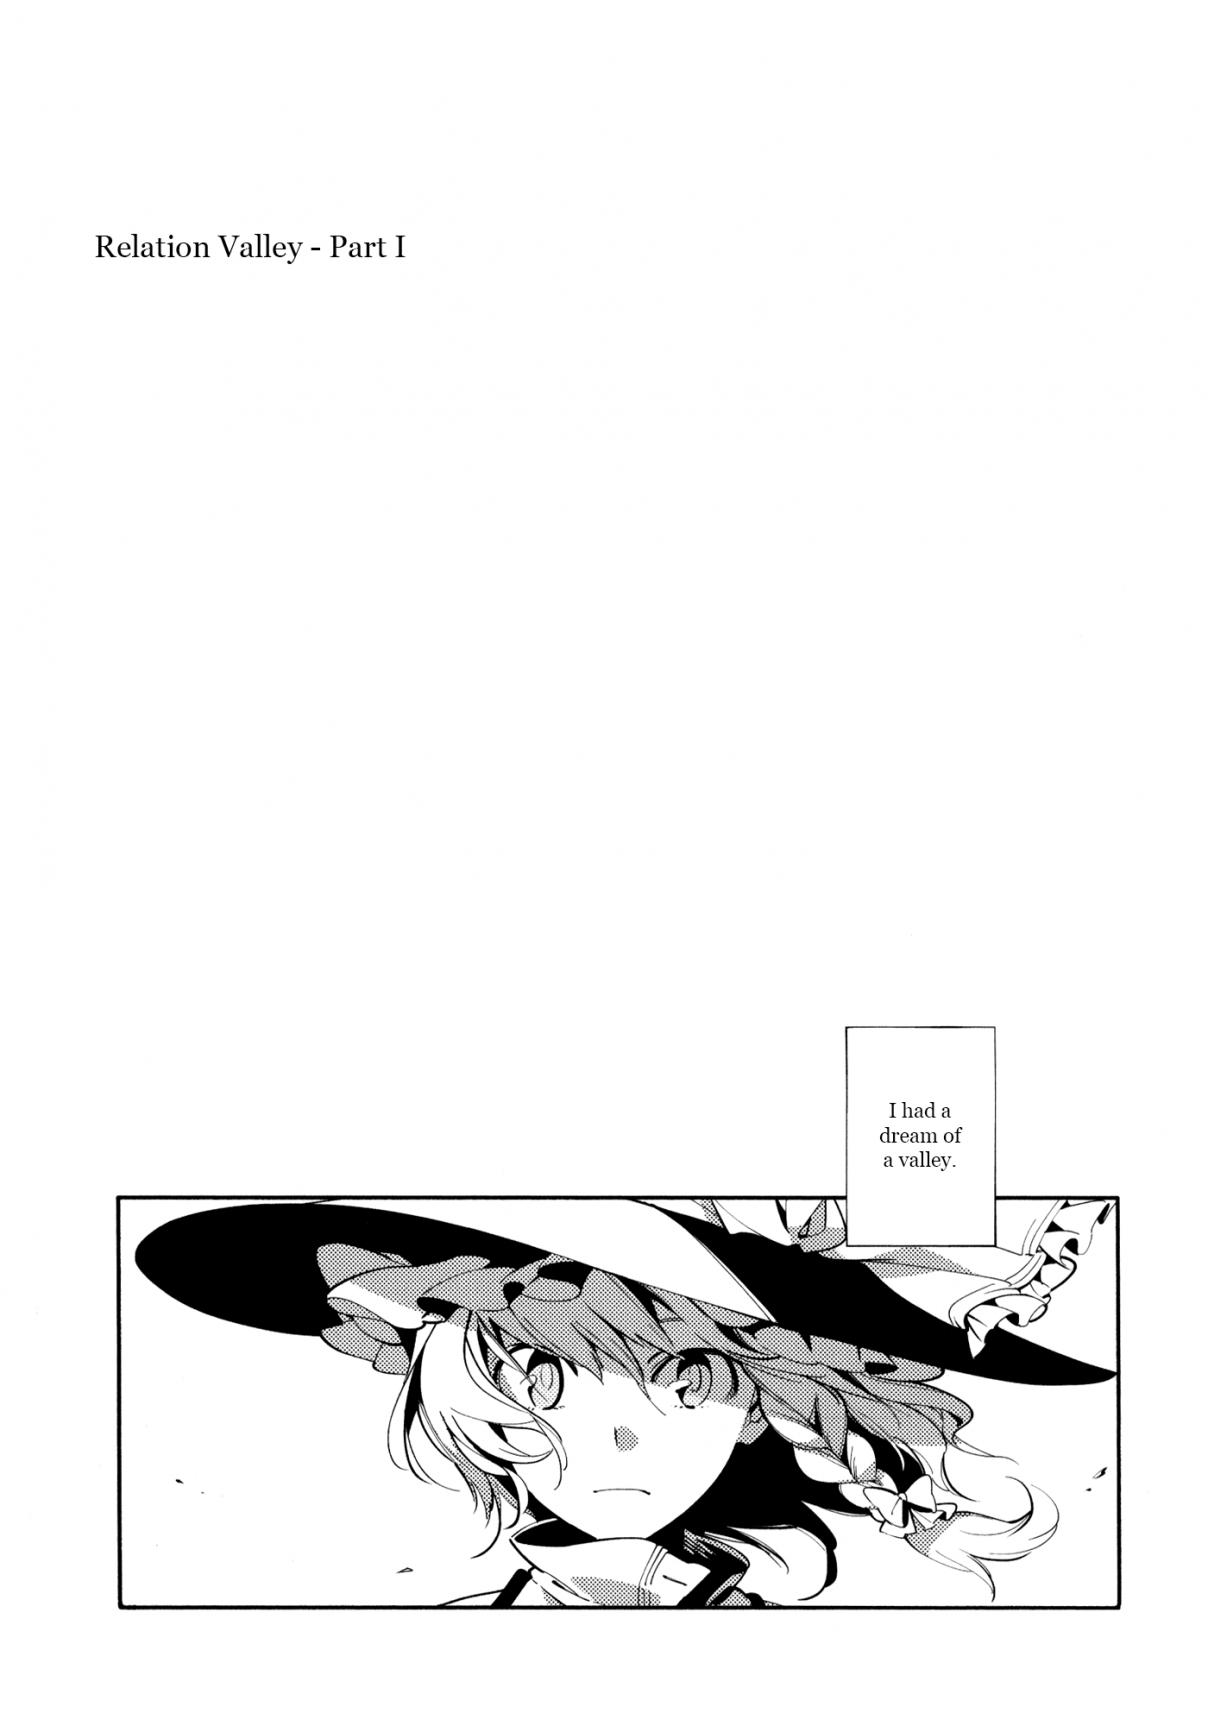 Touhou Relation Valley Anthology (Doujinshi) Vol. 1 Ch. 1 Relation Valley Part 1